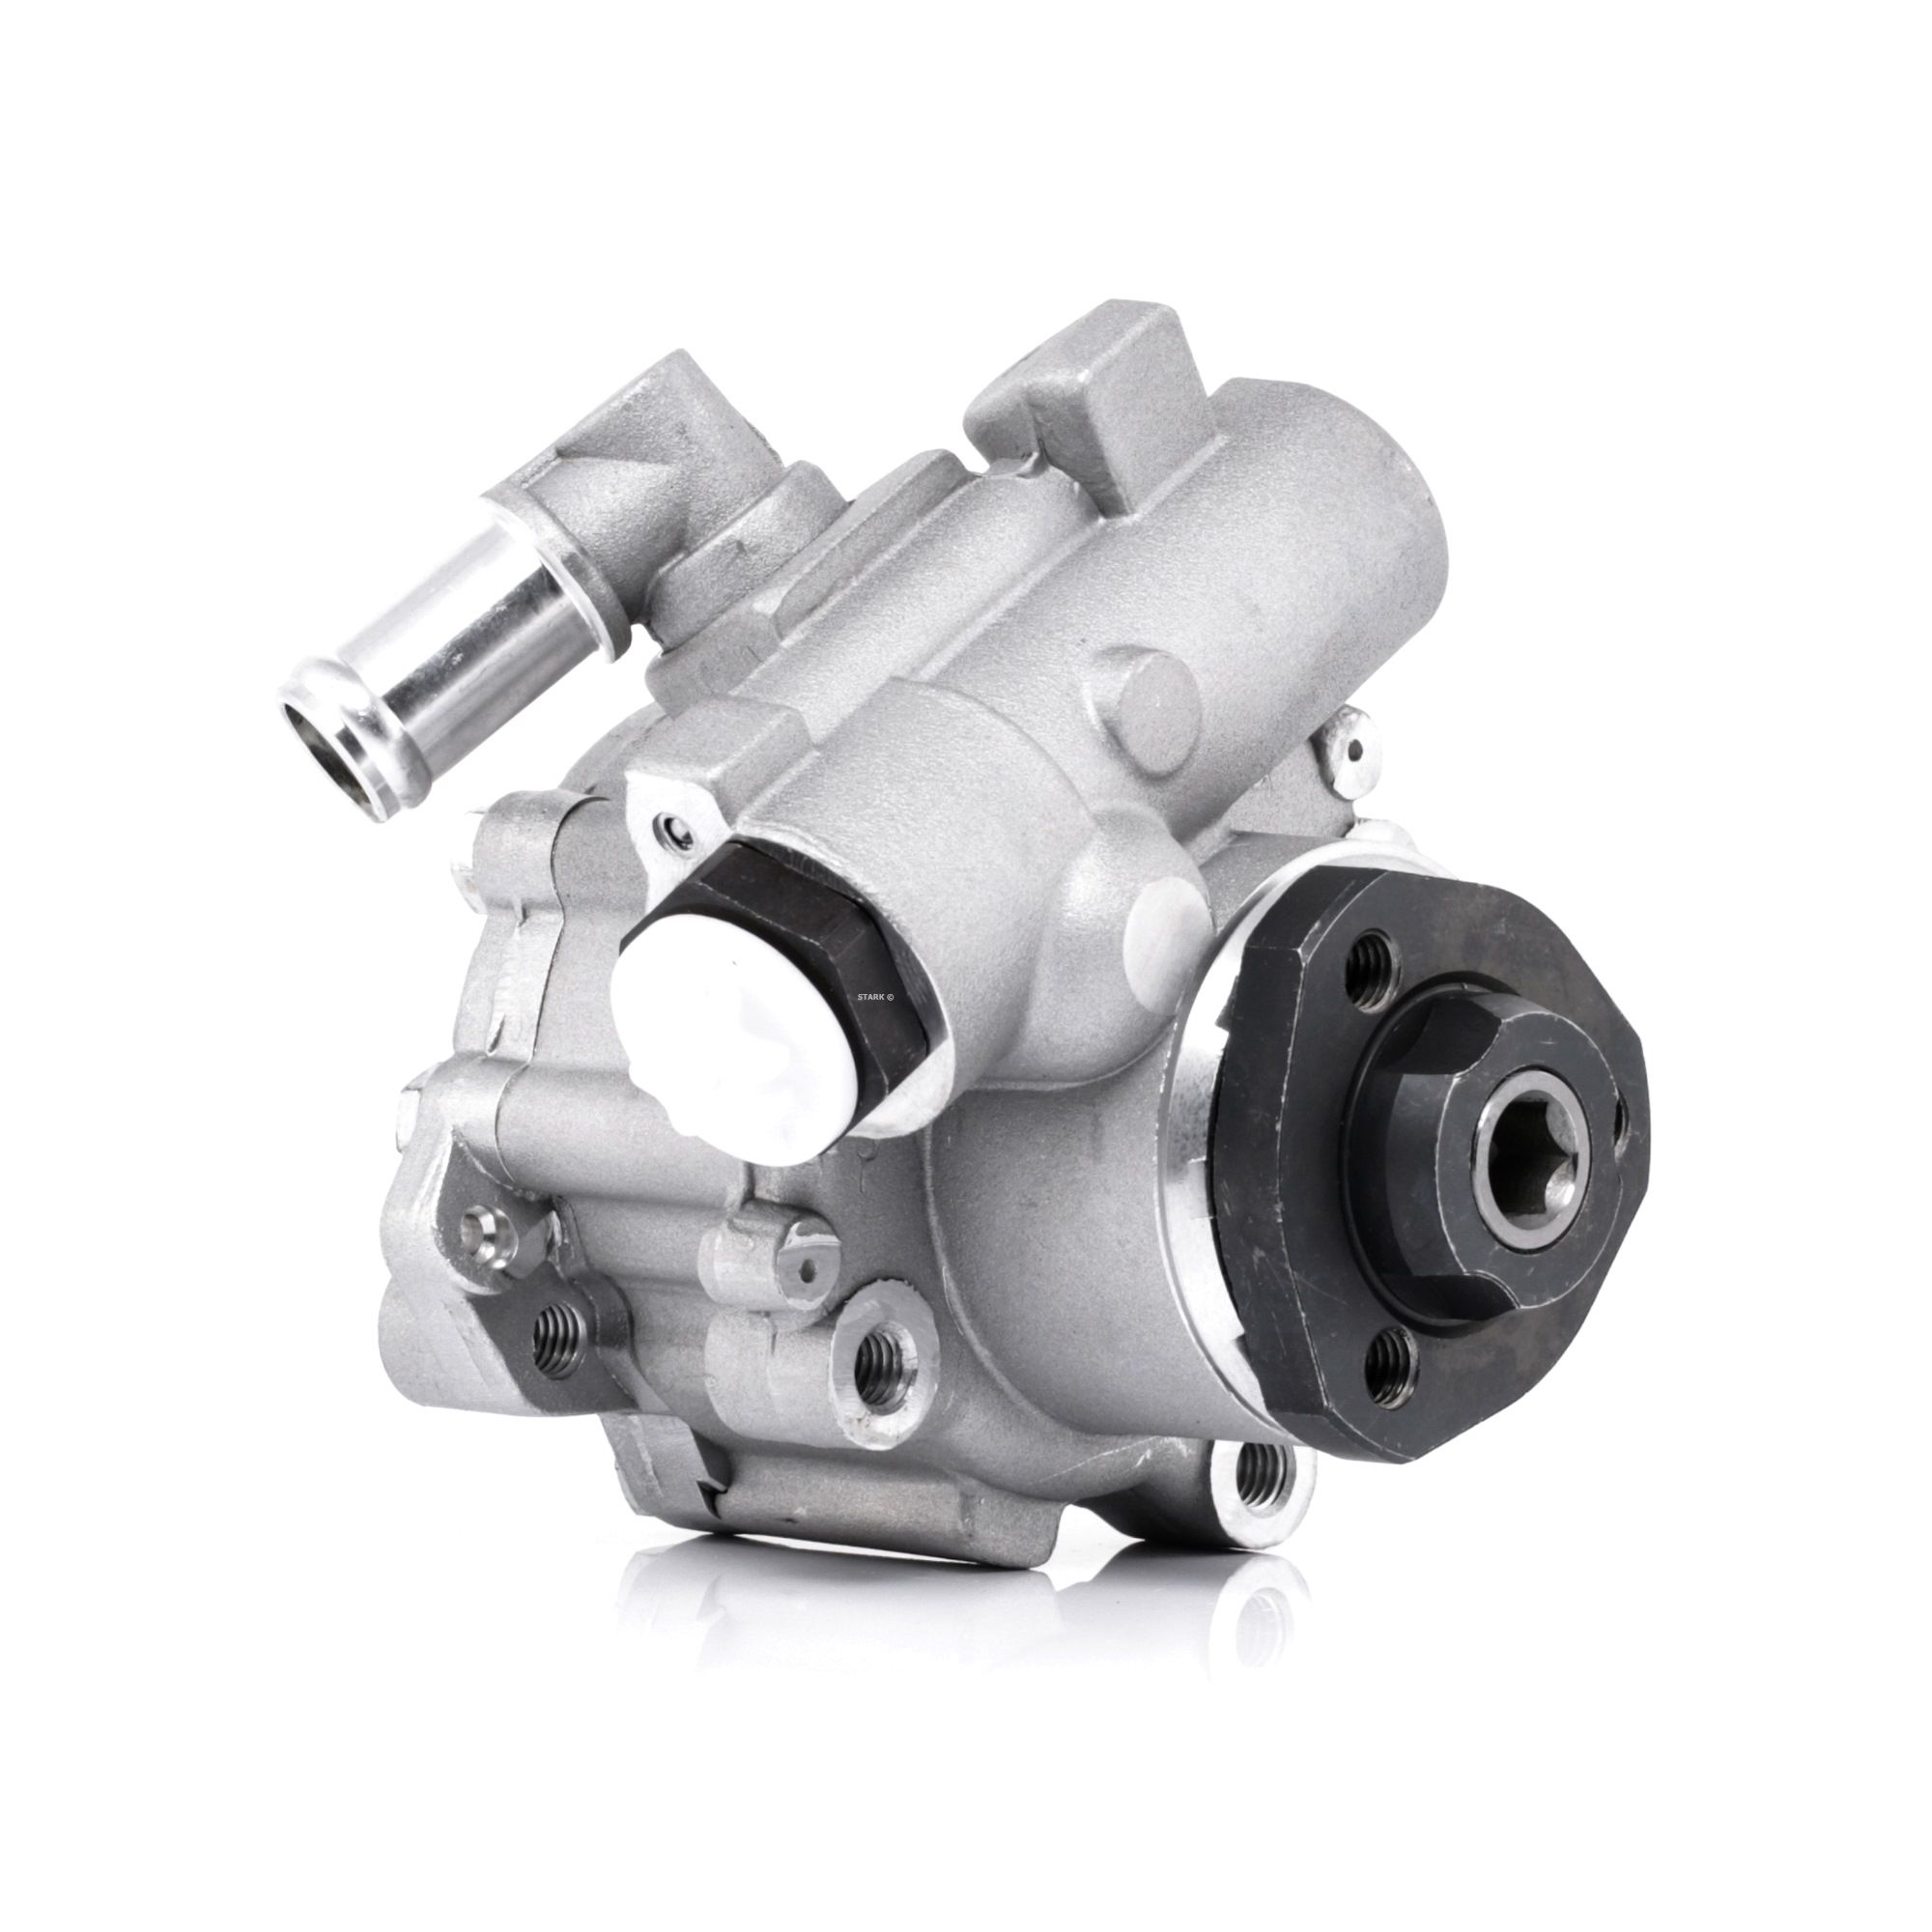 STARK SKHP-0540007 Power steering pump Hydraulic, 100 bar, 60 l/h, Curved triangle